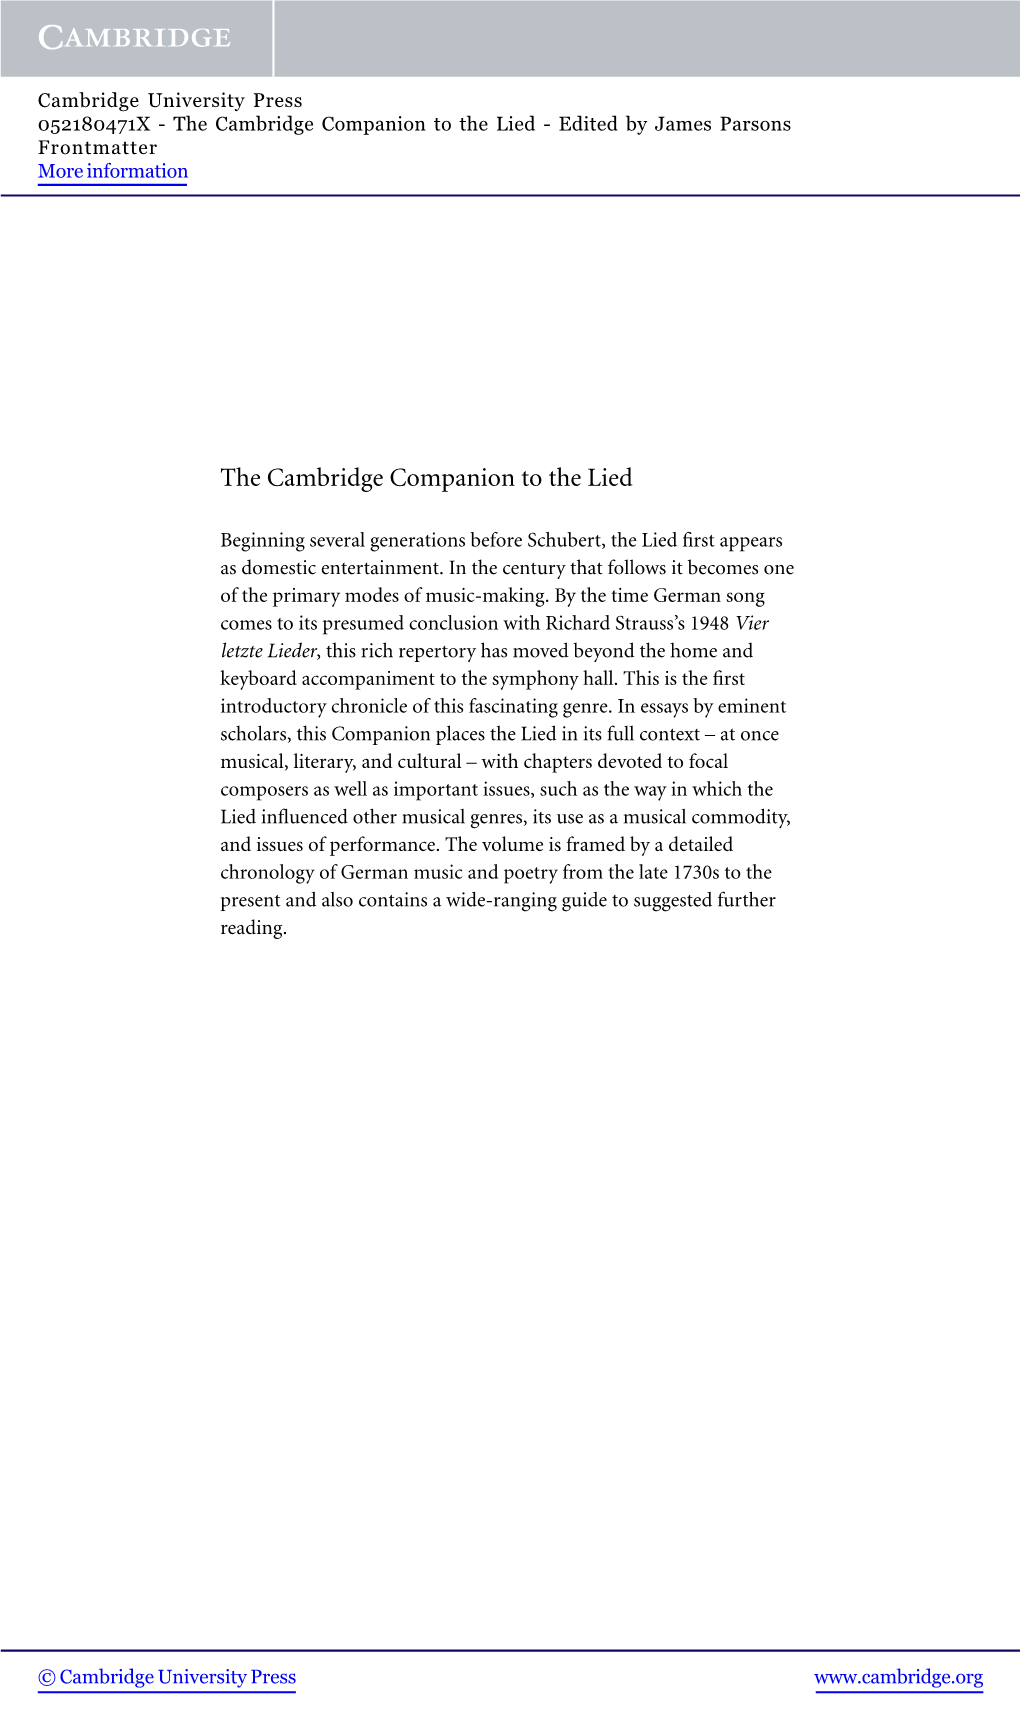 The Cambridge Companion to the Lied - Edited by James Parsons Frontmatter More Information